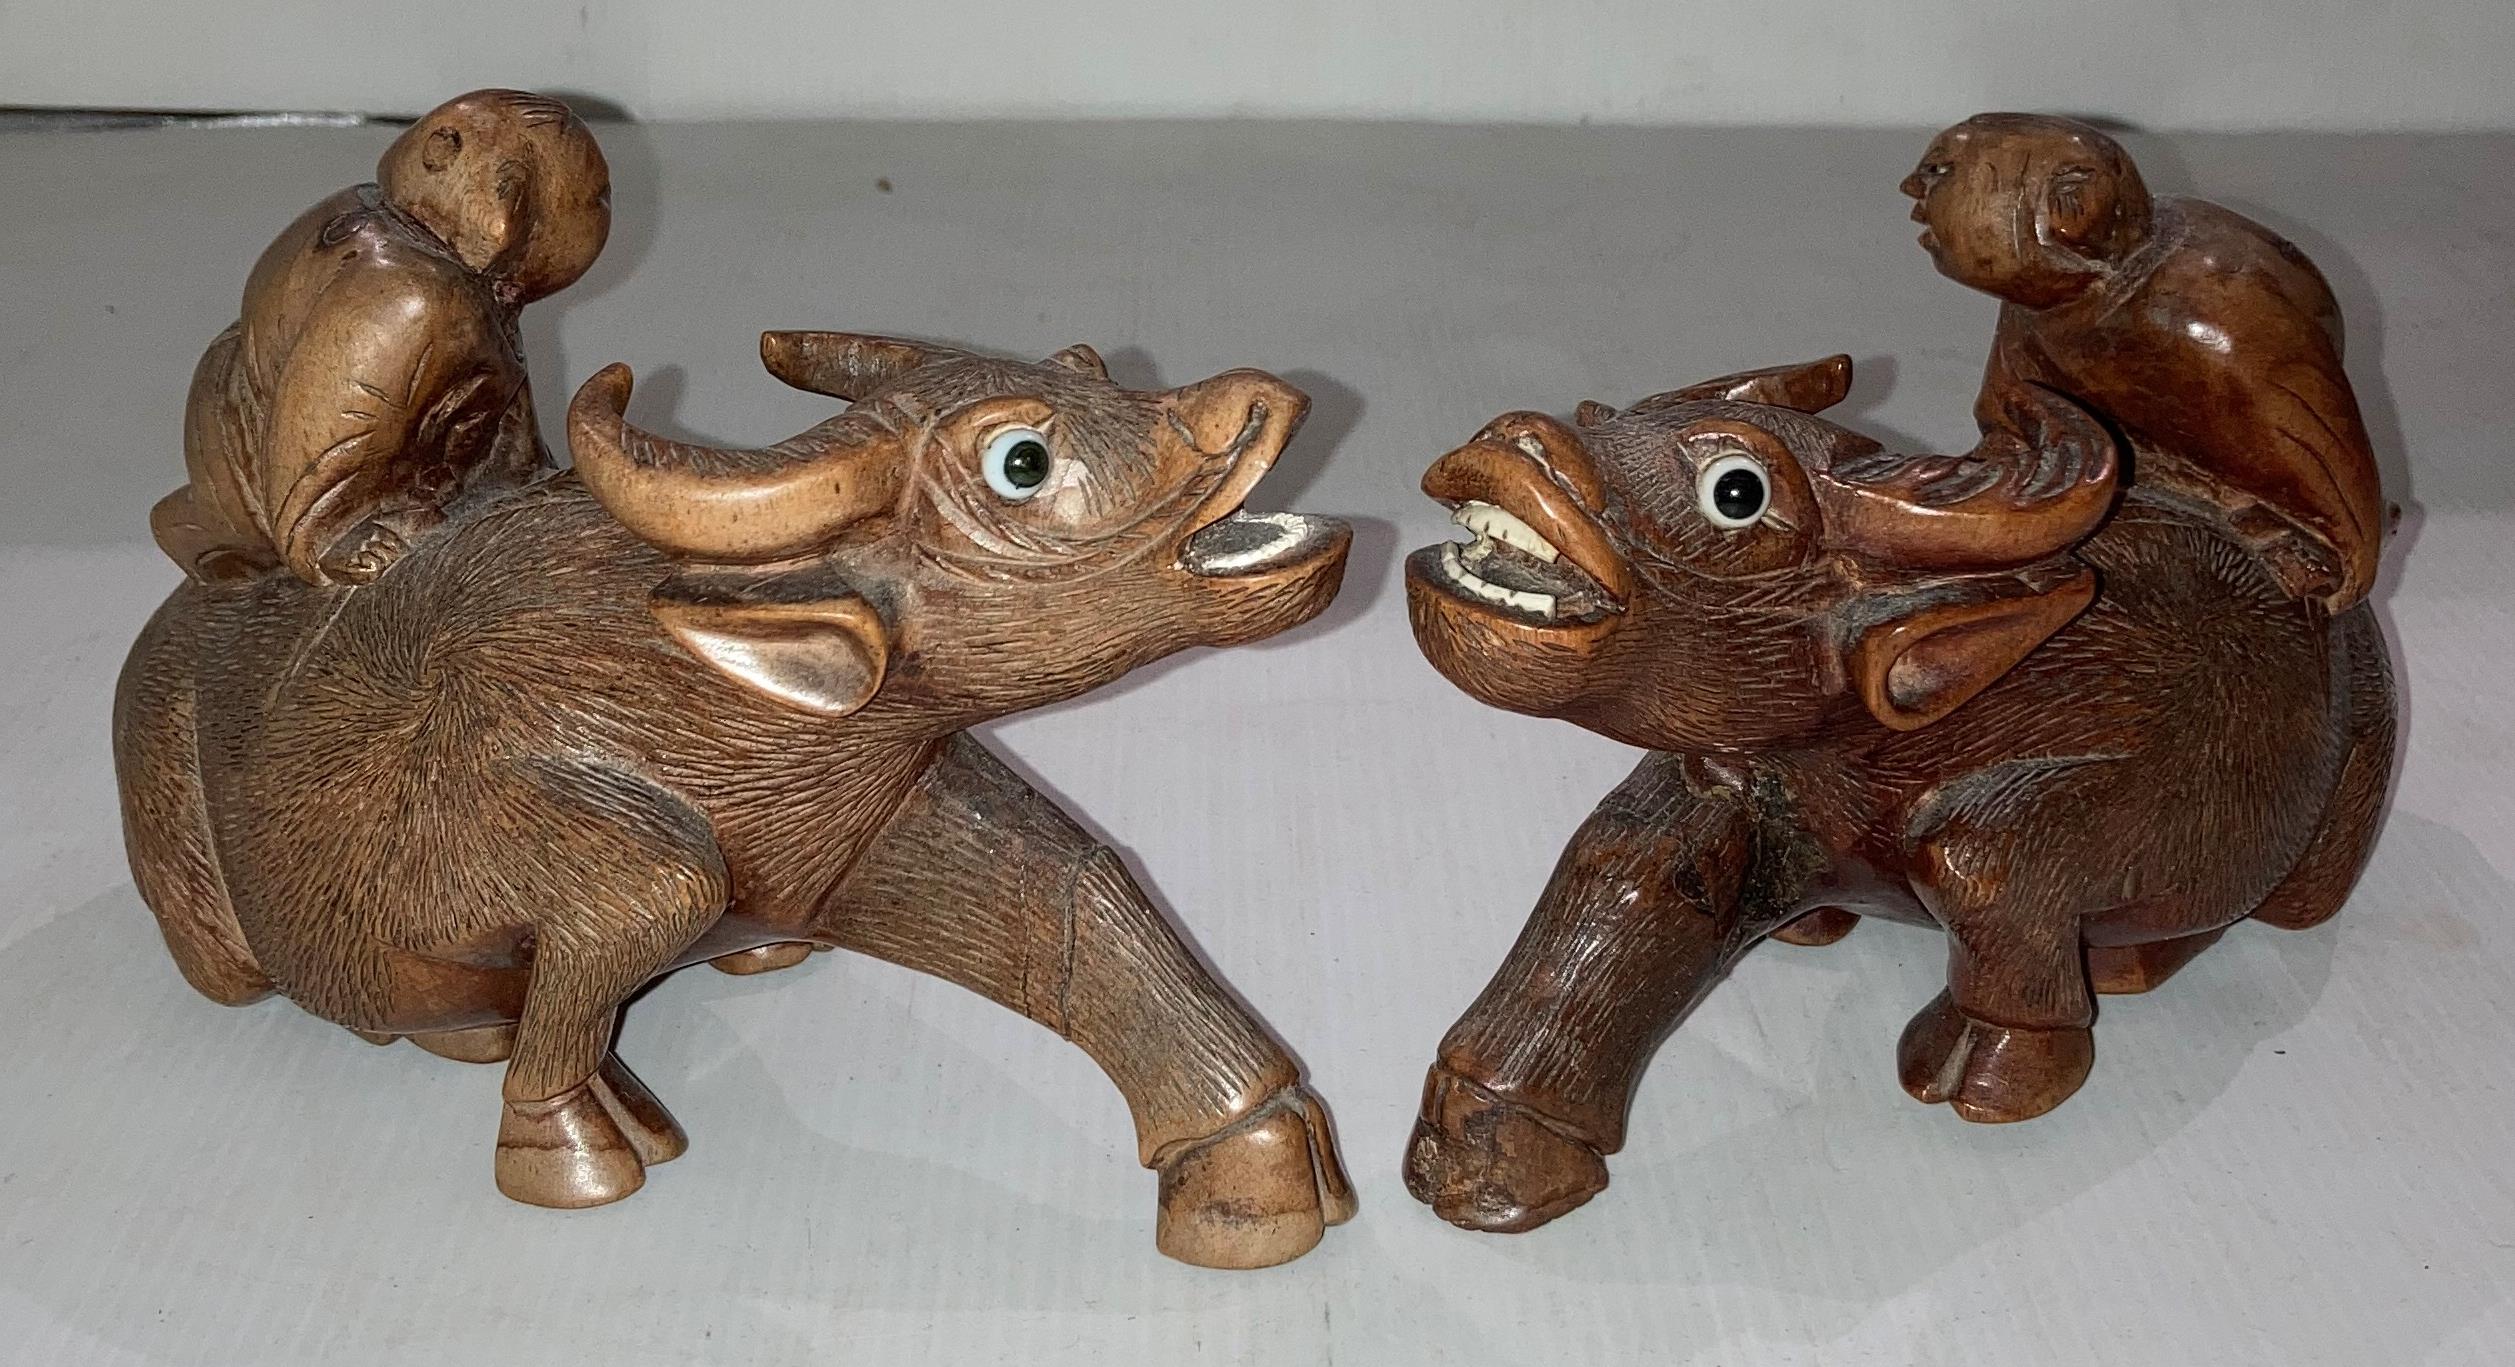 Pair of wooden hand-carved Oriental water buffalo with figures seated, approximately 10. - Image 2 of 4